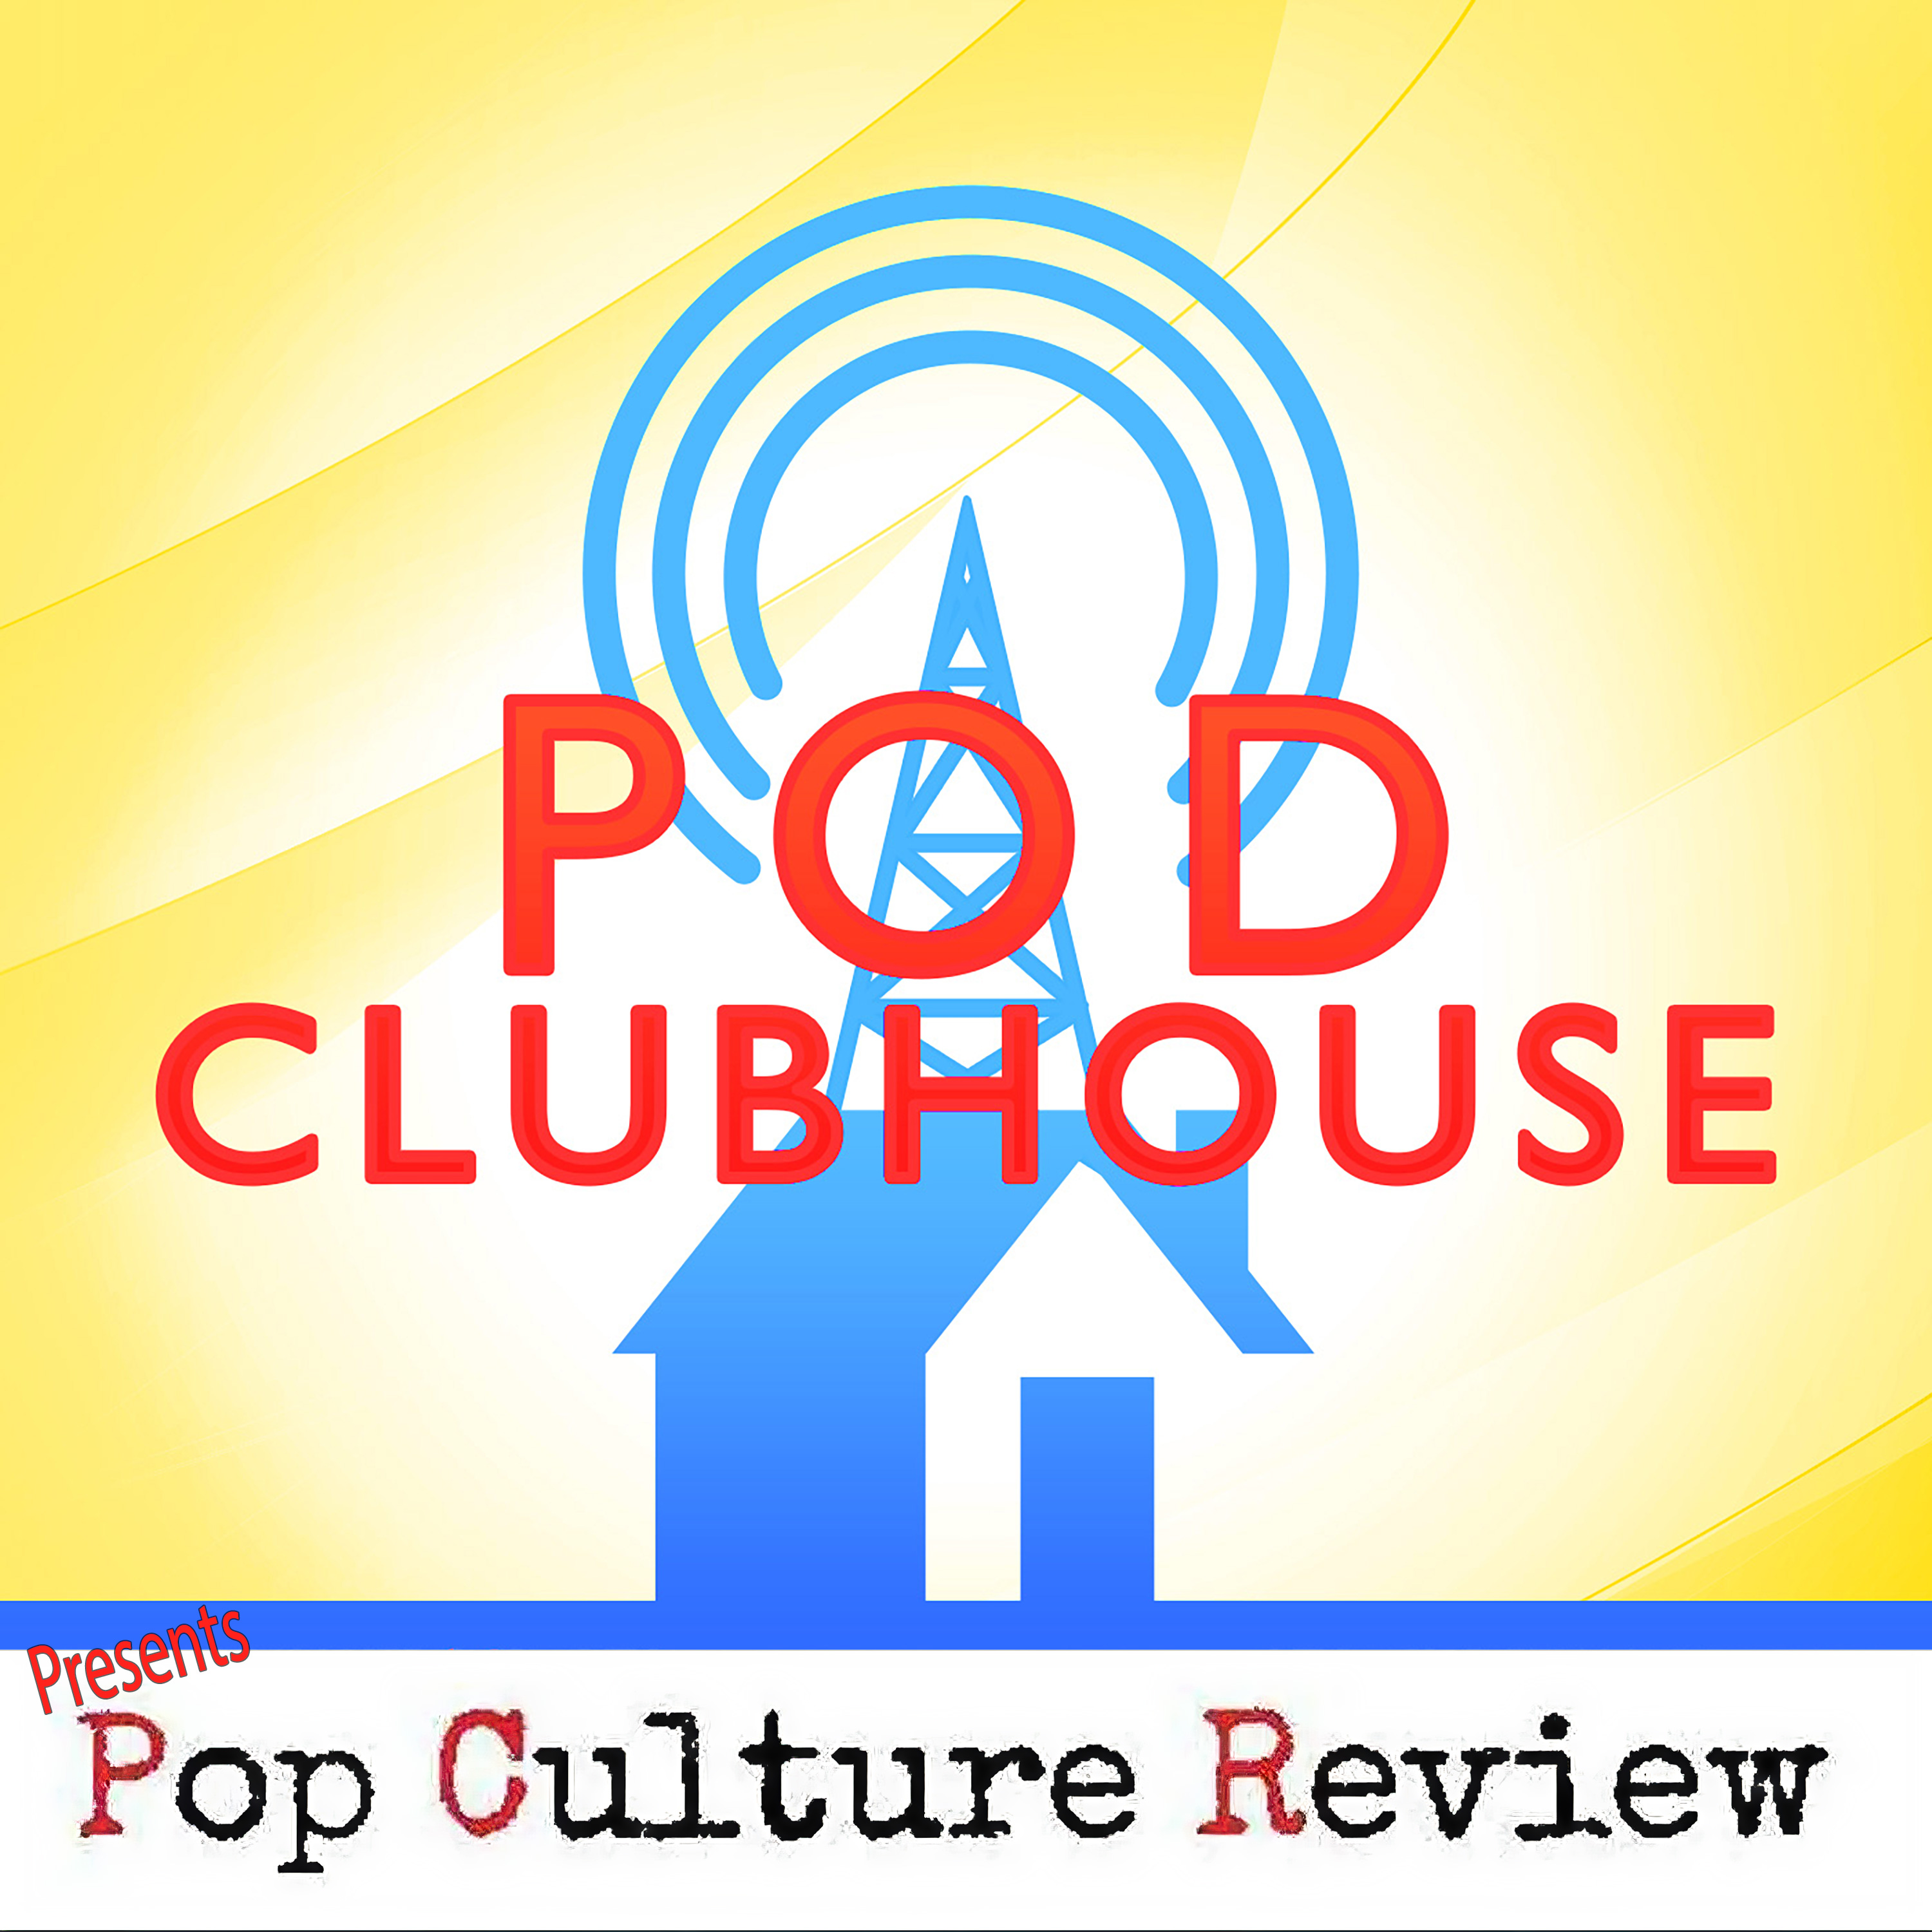 The Pop Culture Review Podcast